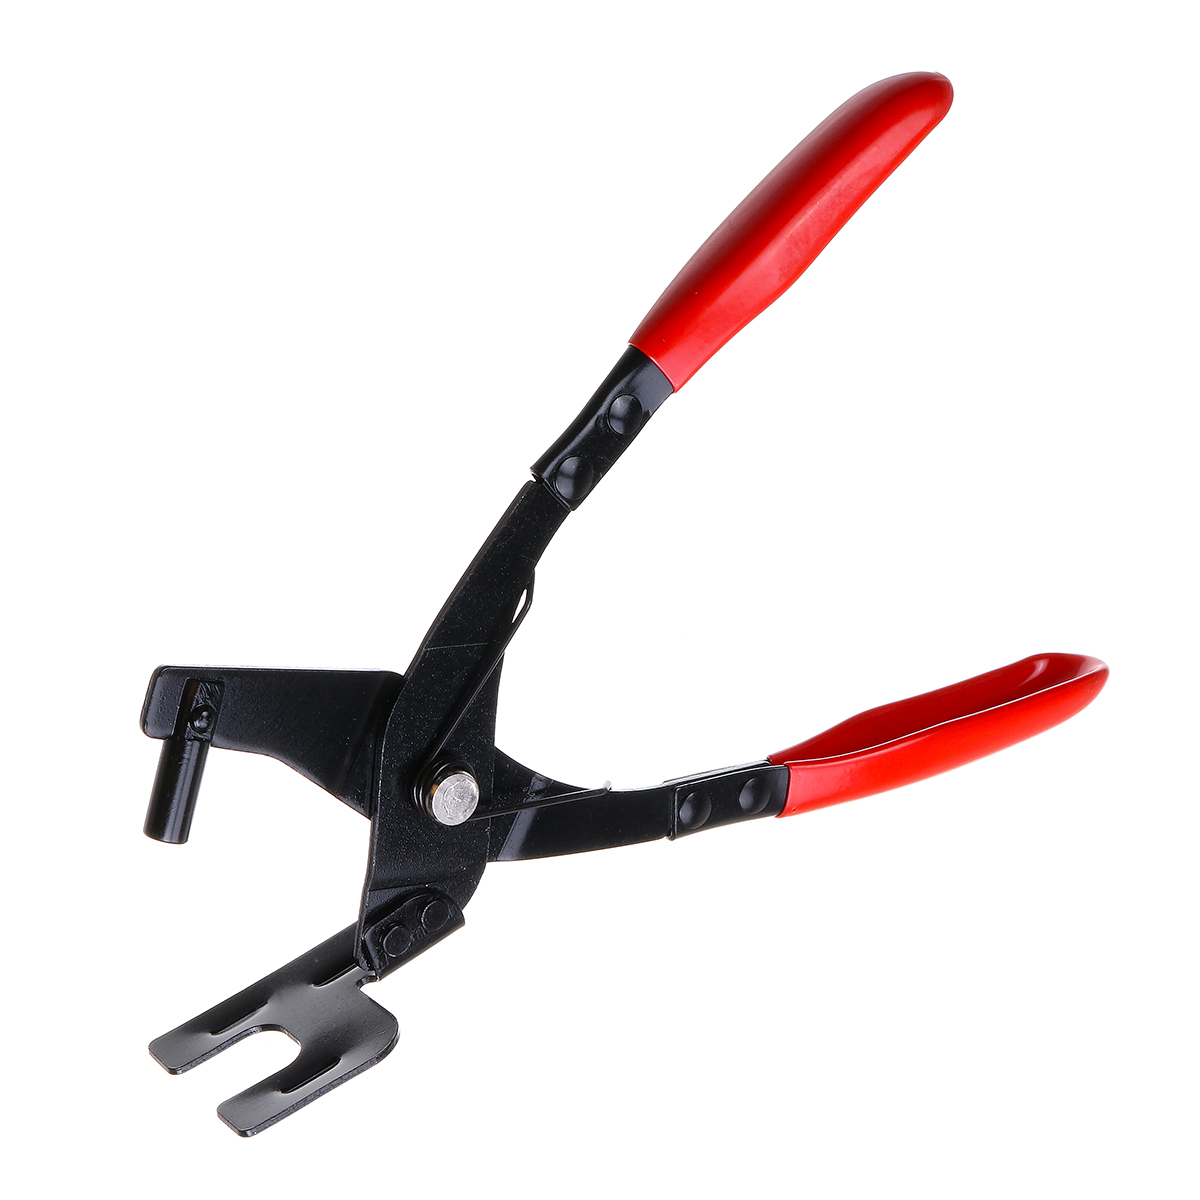 

Exhaust Muffler Pipe Hanger Remover Pliers Removal Stretcher Repair Tool Steel